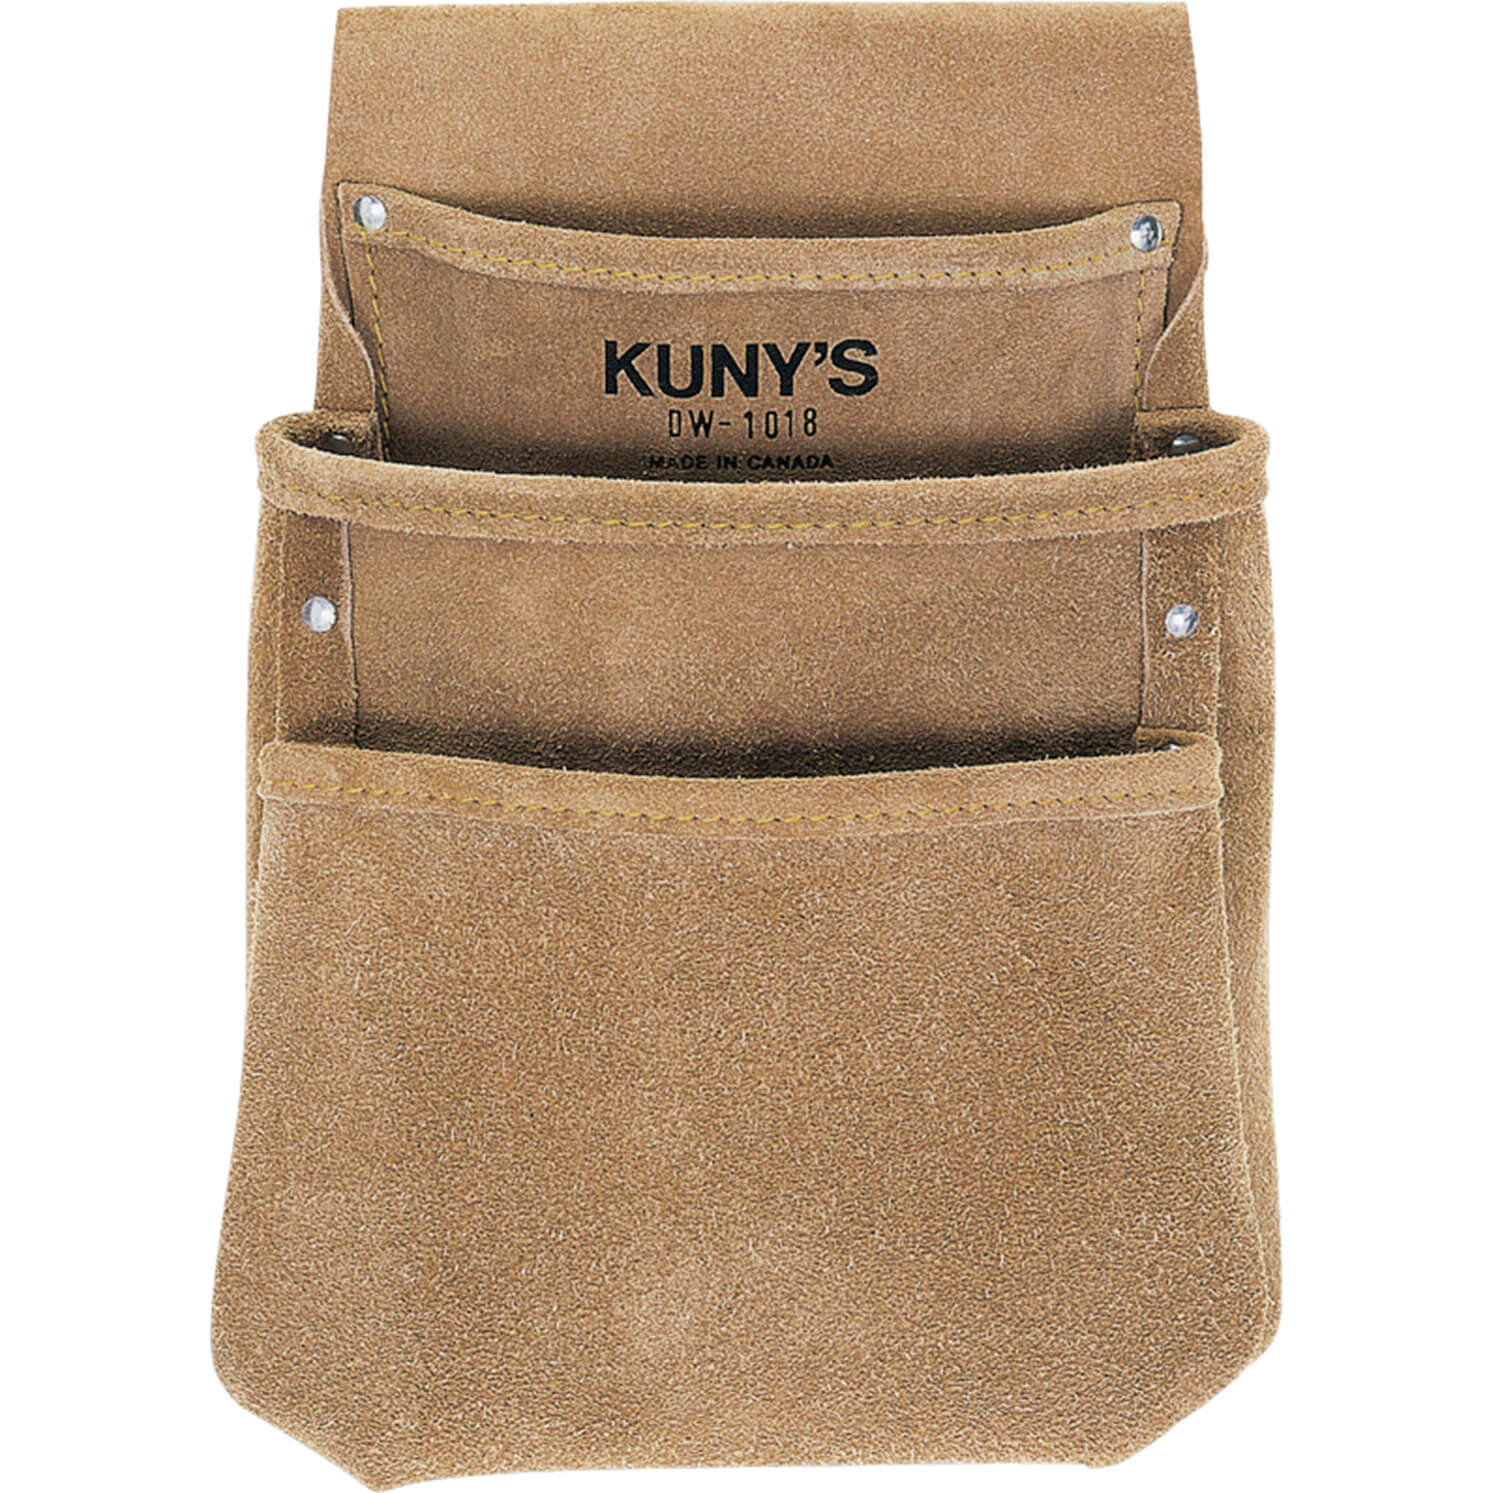 Kunys 3 Pocket Split Grain Leather Drywall Pouch | Tool Holders & Pouches